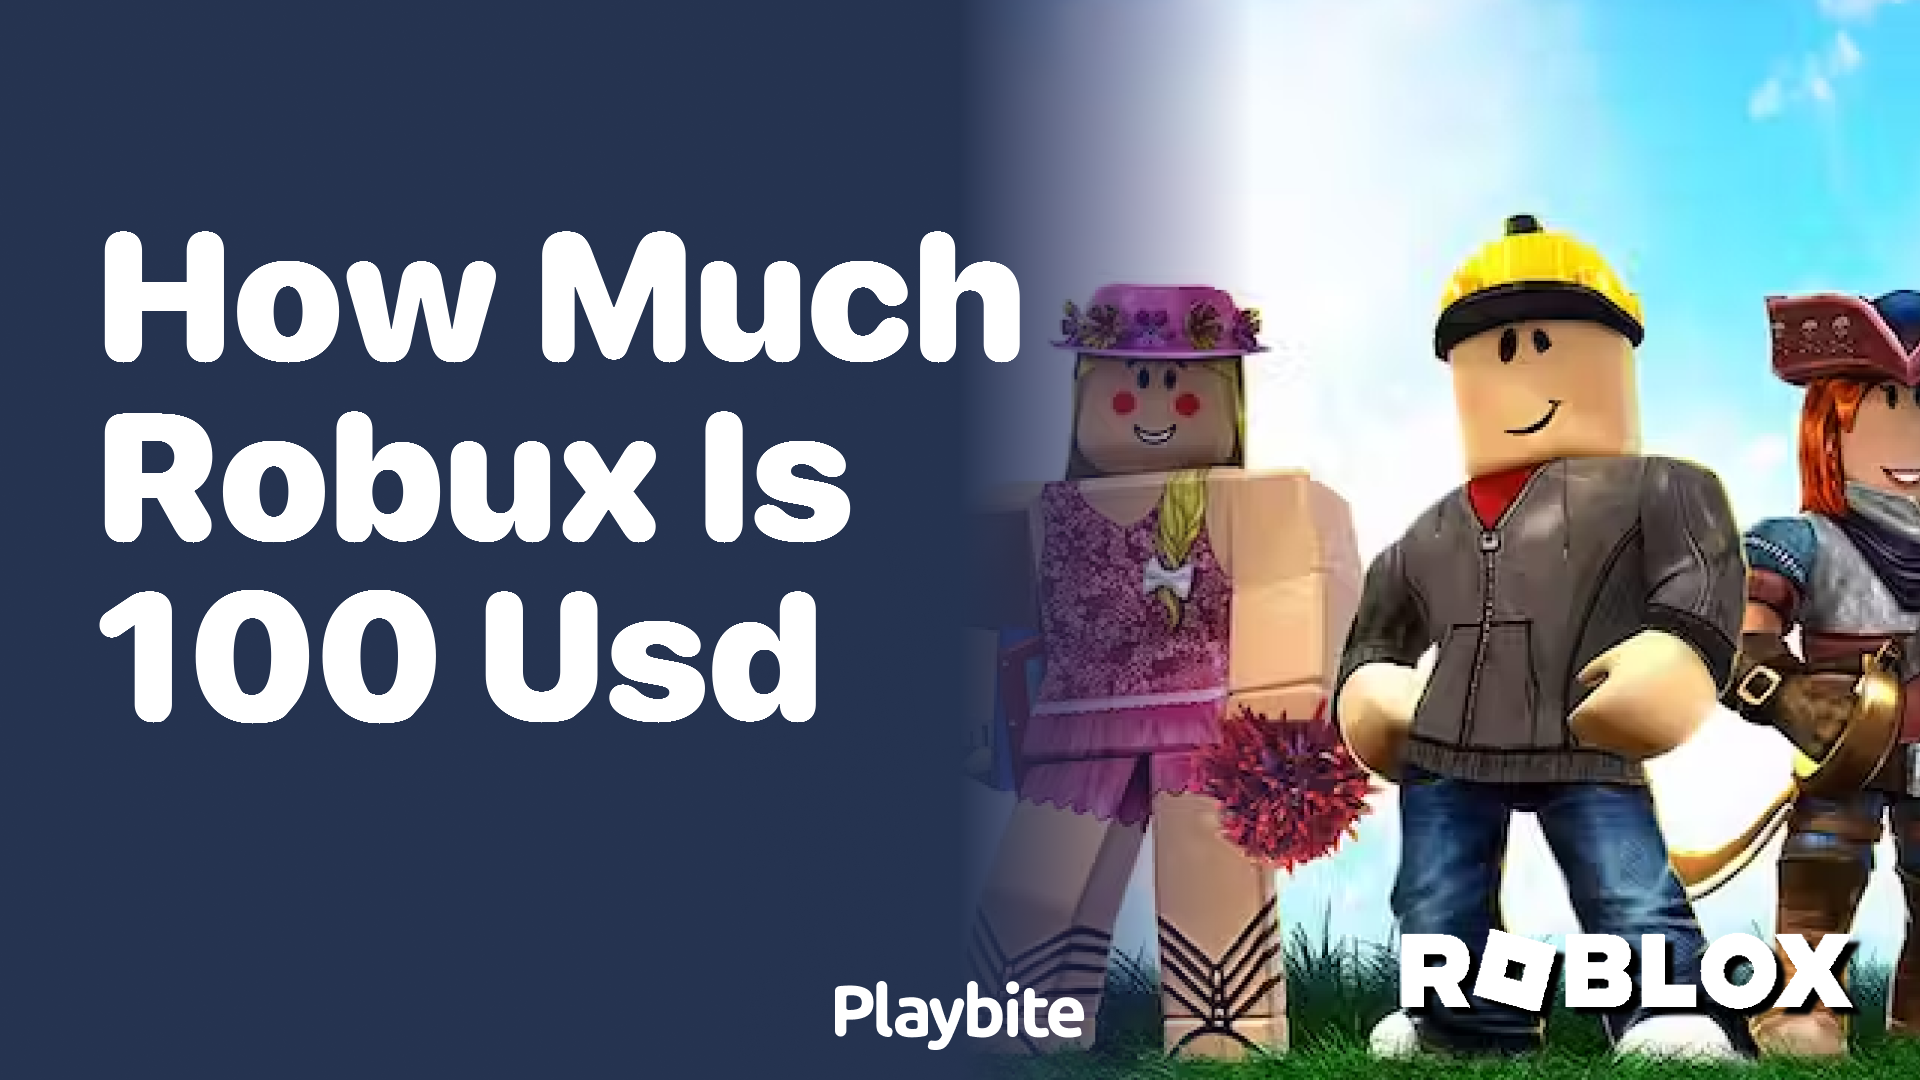 How Much Robux Can You Get with 100 USD?